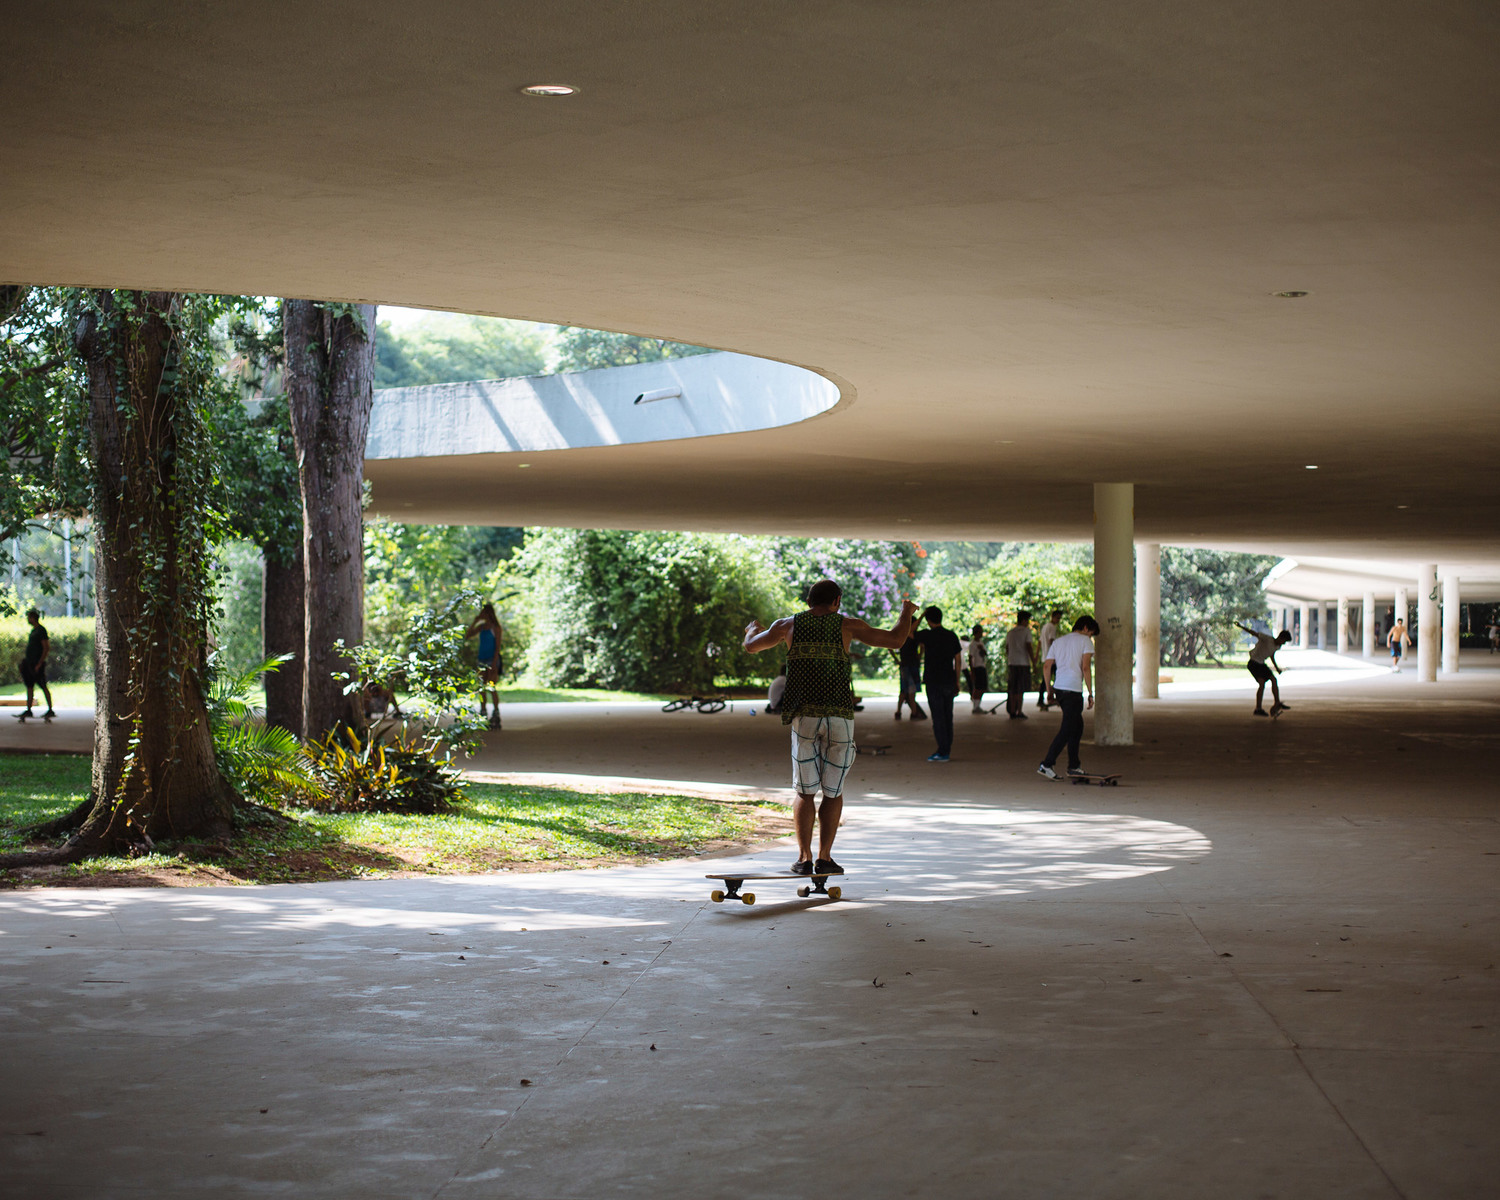  The skate park surrounds the entrance of the São Paulo Museum of Modern Art, located in the center of Ibirapuera Park. 